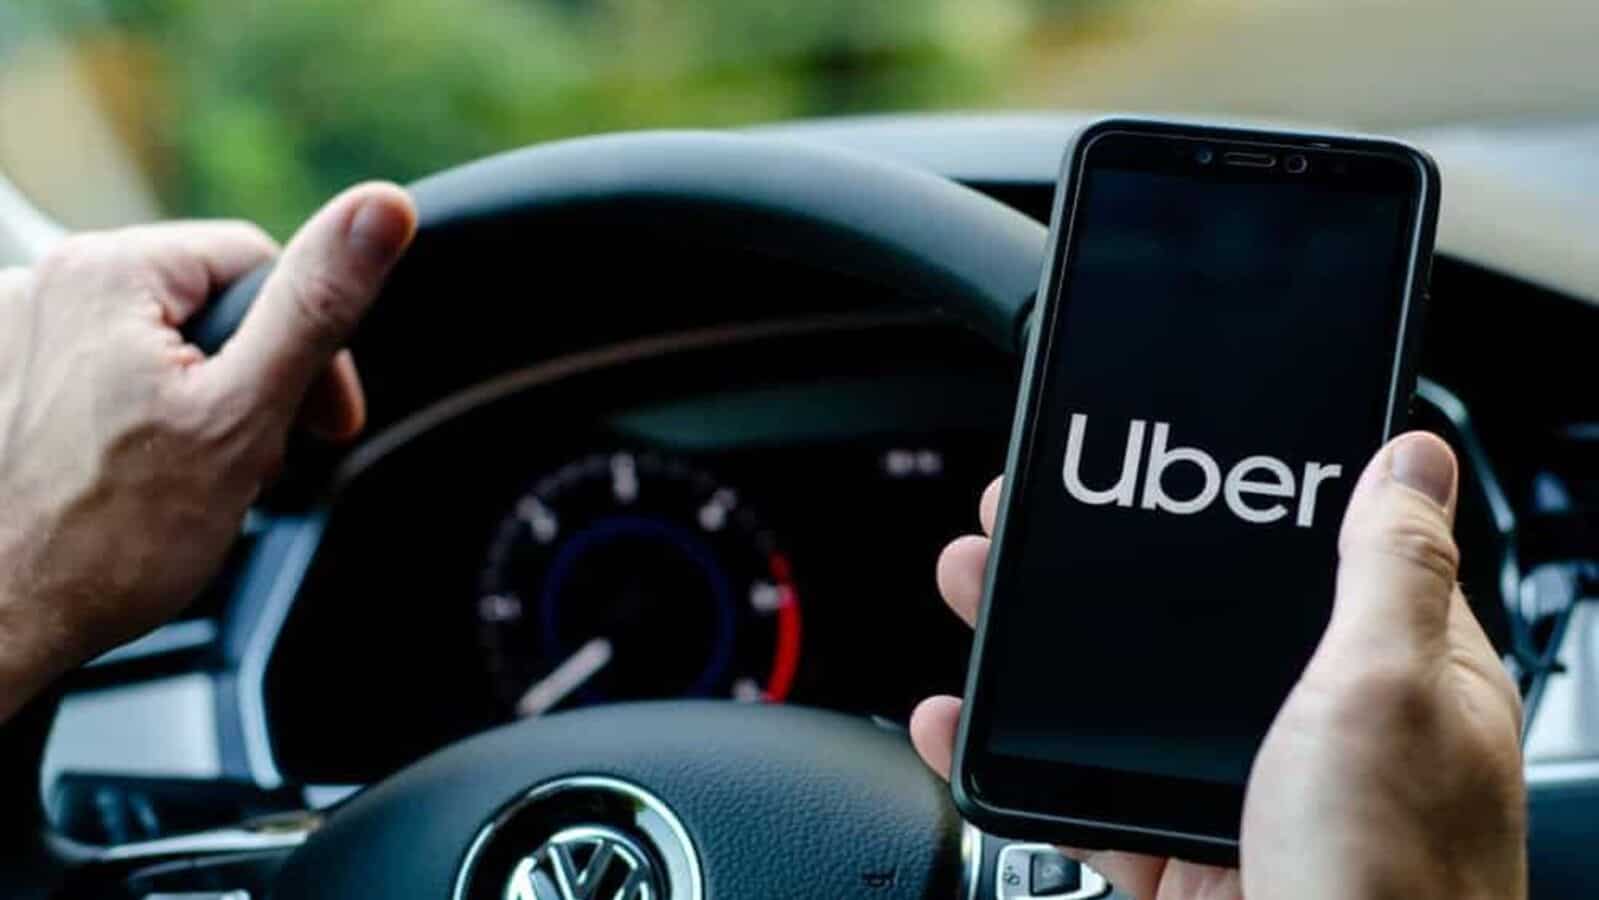 Uber bug would have allowed users to take free rides across the world: Read Full Details